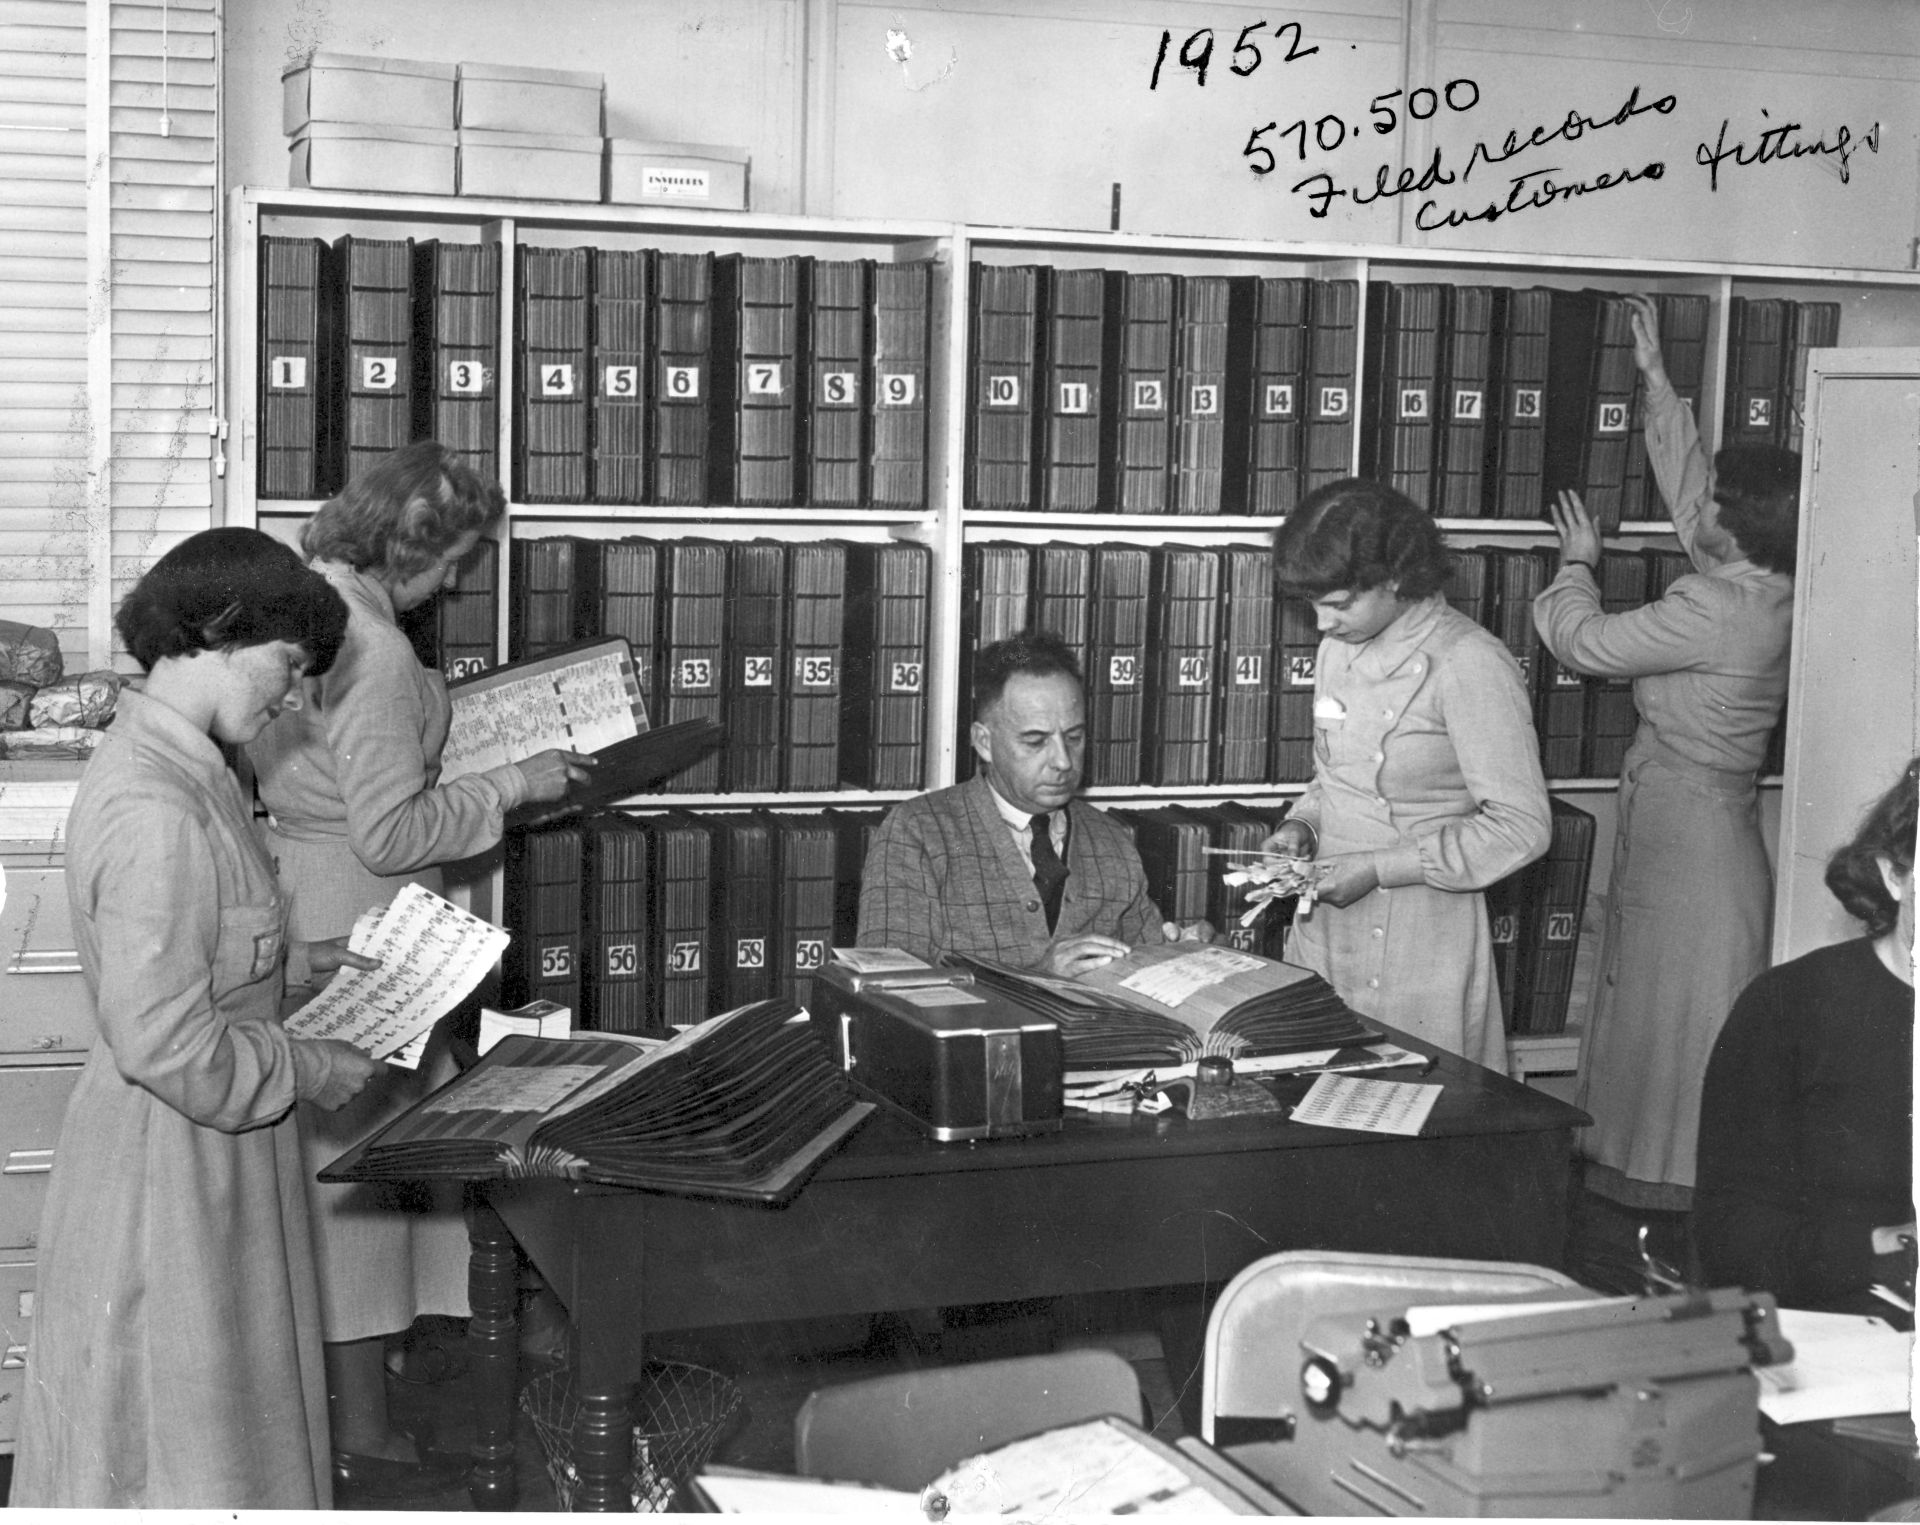 Mail order staff with part of the FJ extensive filing system - 1952.  Photo: Jones Family Collection 